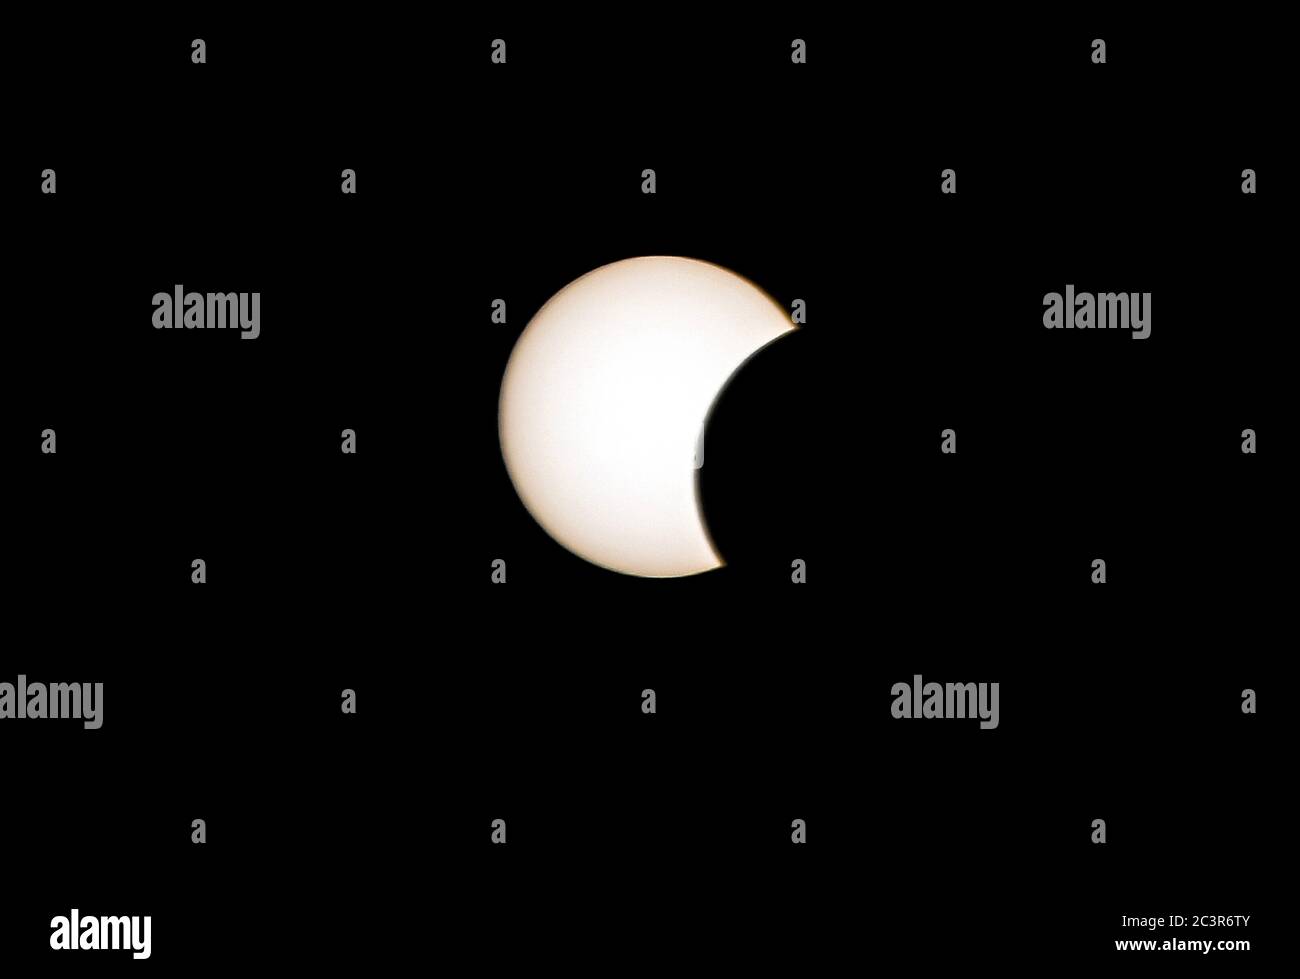 Damascus, Syria. 21st June, 2020. A solar eclipse is seen in the sky over Damascus, Syria, on June 21, 2020. An annular solar eclipse occurred on Sunday. Credit: Ammar Safarjalani/Xinhua/Alamy Live News Stock Photo